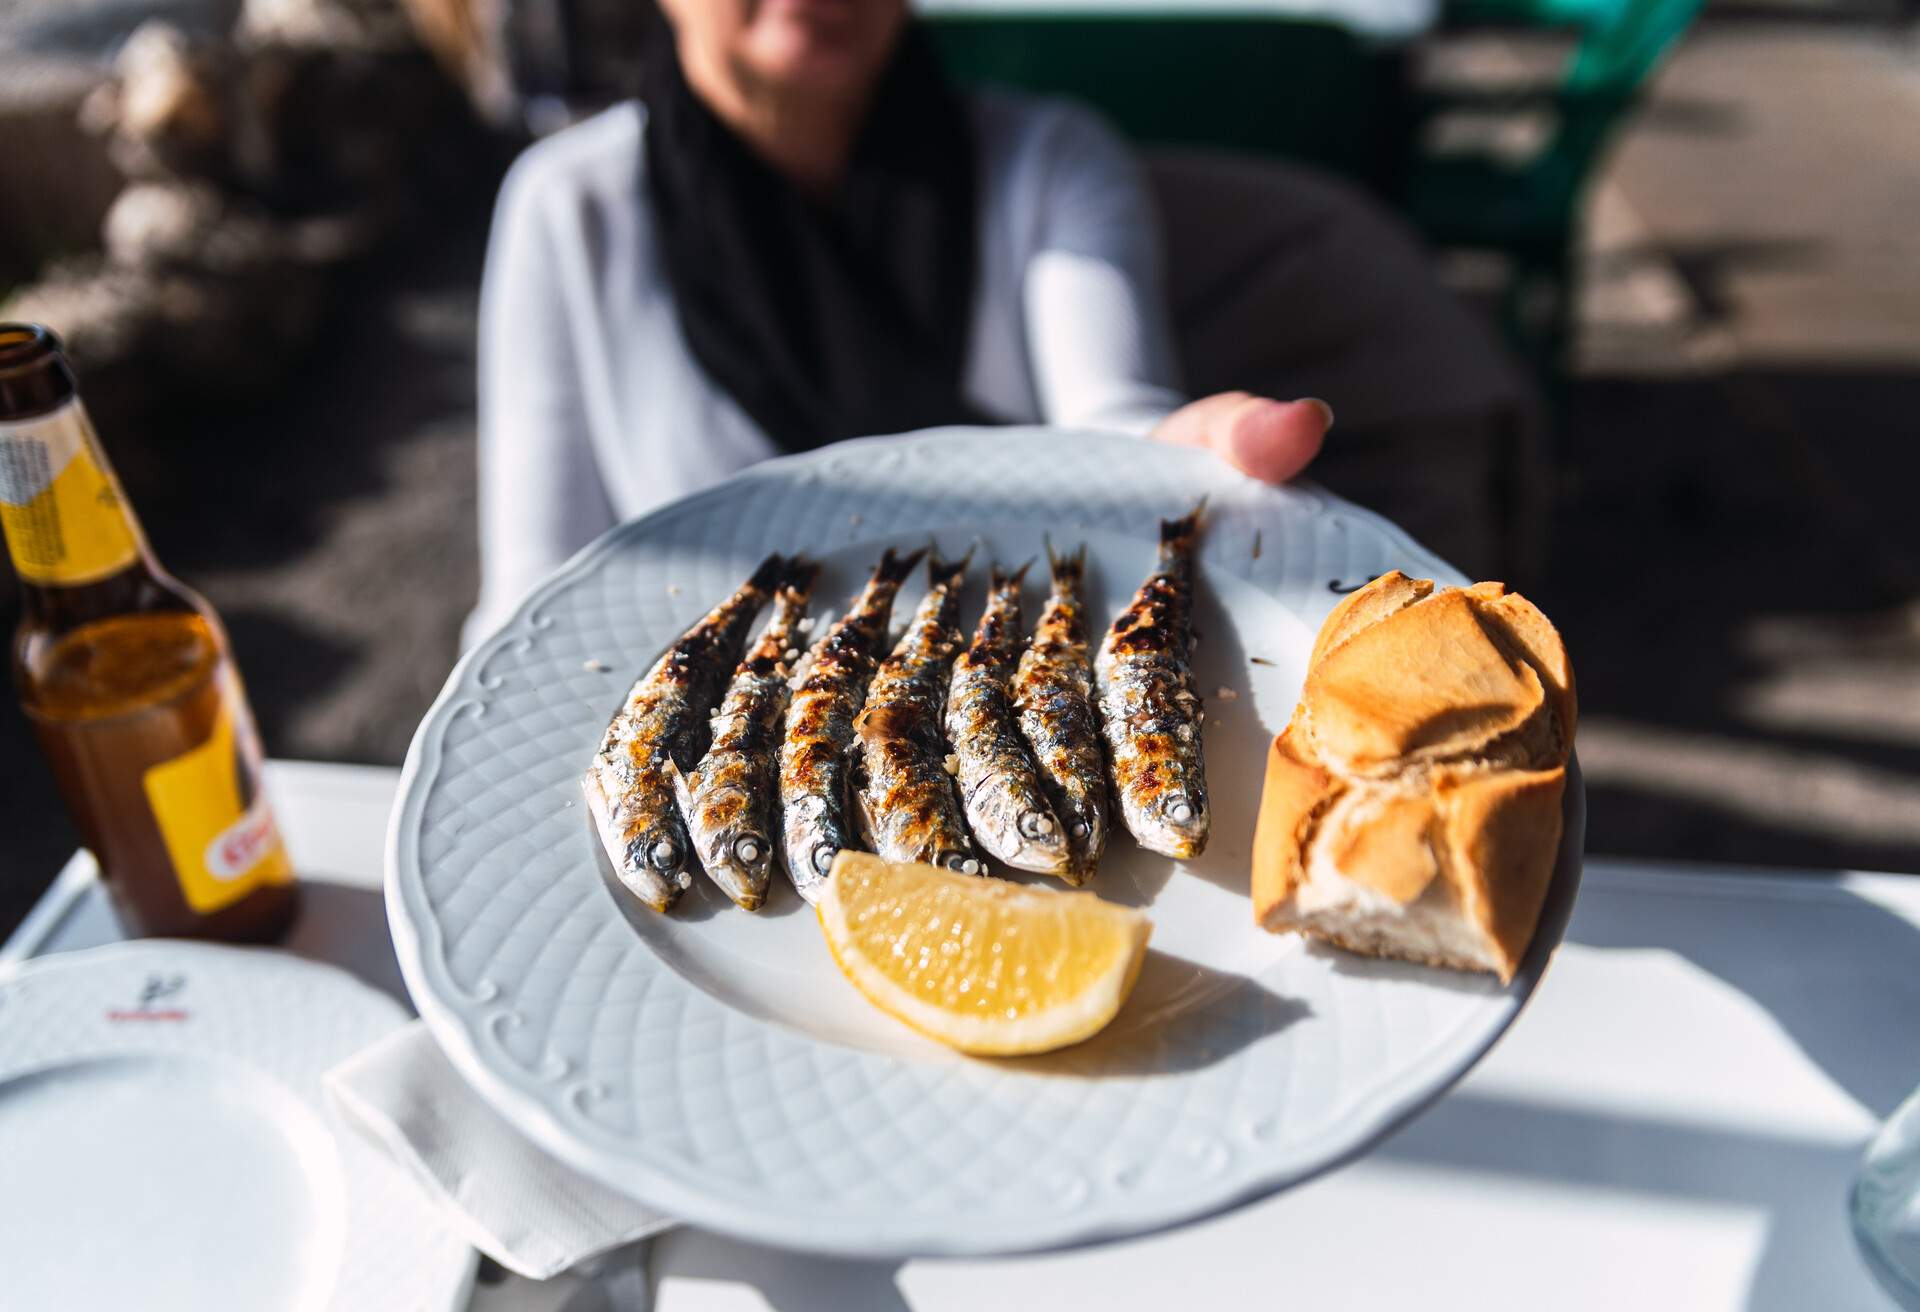 SPAIN_MALAGA_WOMAN_HOLDING_PLATE_FRESHLY_COOCKED_GRILLED_SARDINES